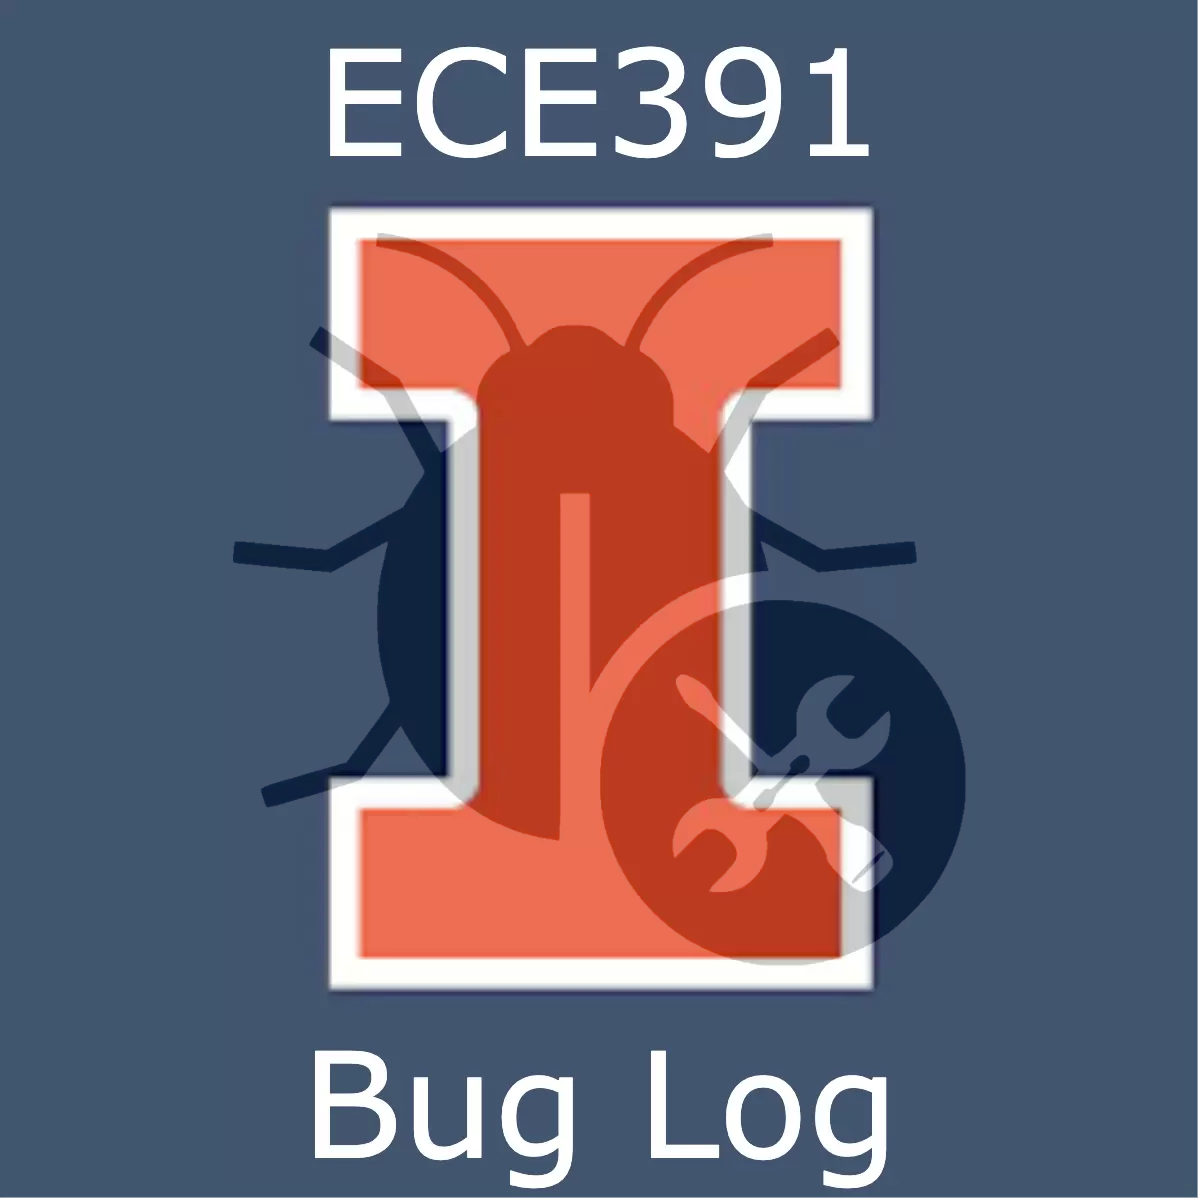 Bug Log Support for UIUC ECE391 1.1.0 Extension for Visual Studio Code